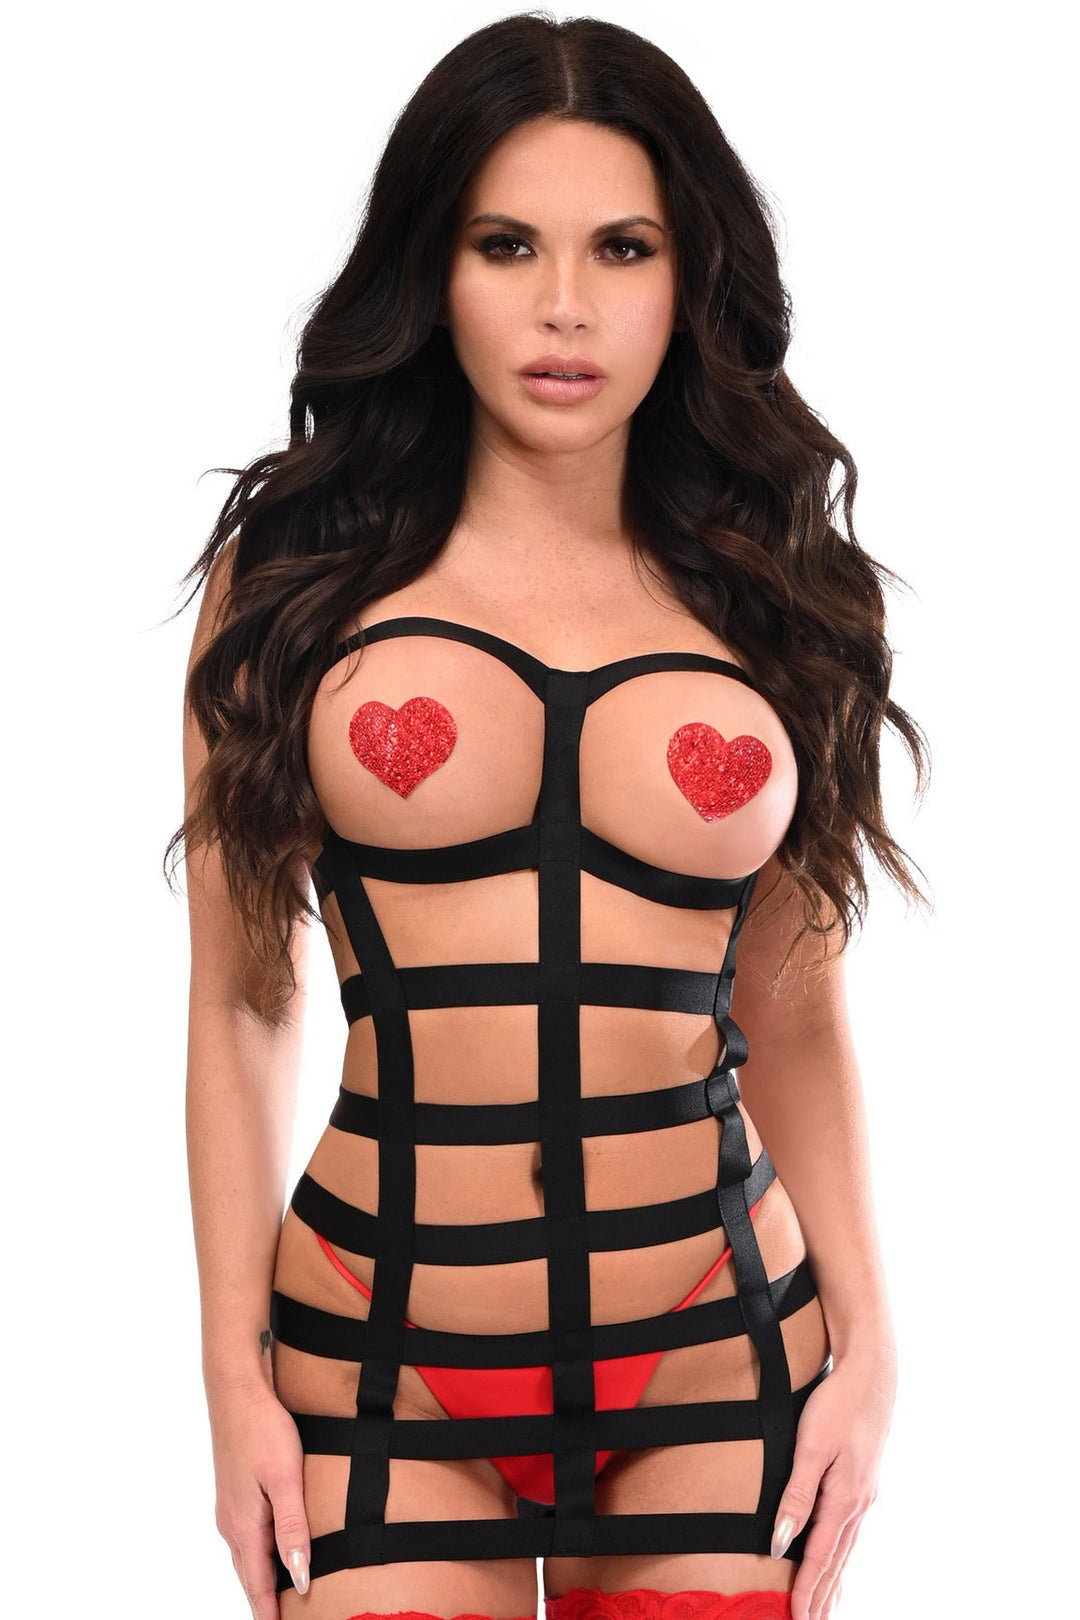 BOXED Black Stretchy Cage Dress Body Harness w/Silver Hardware